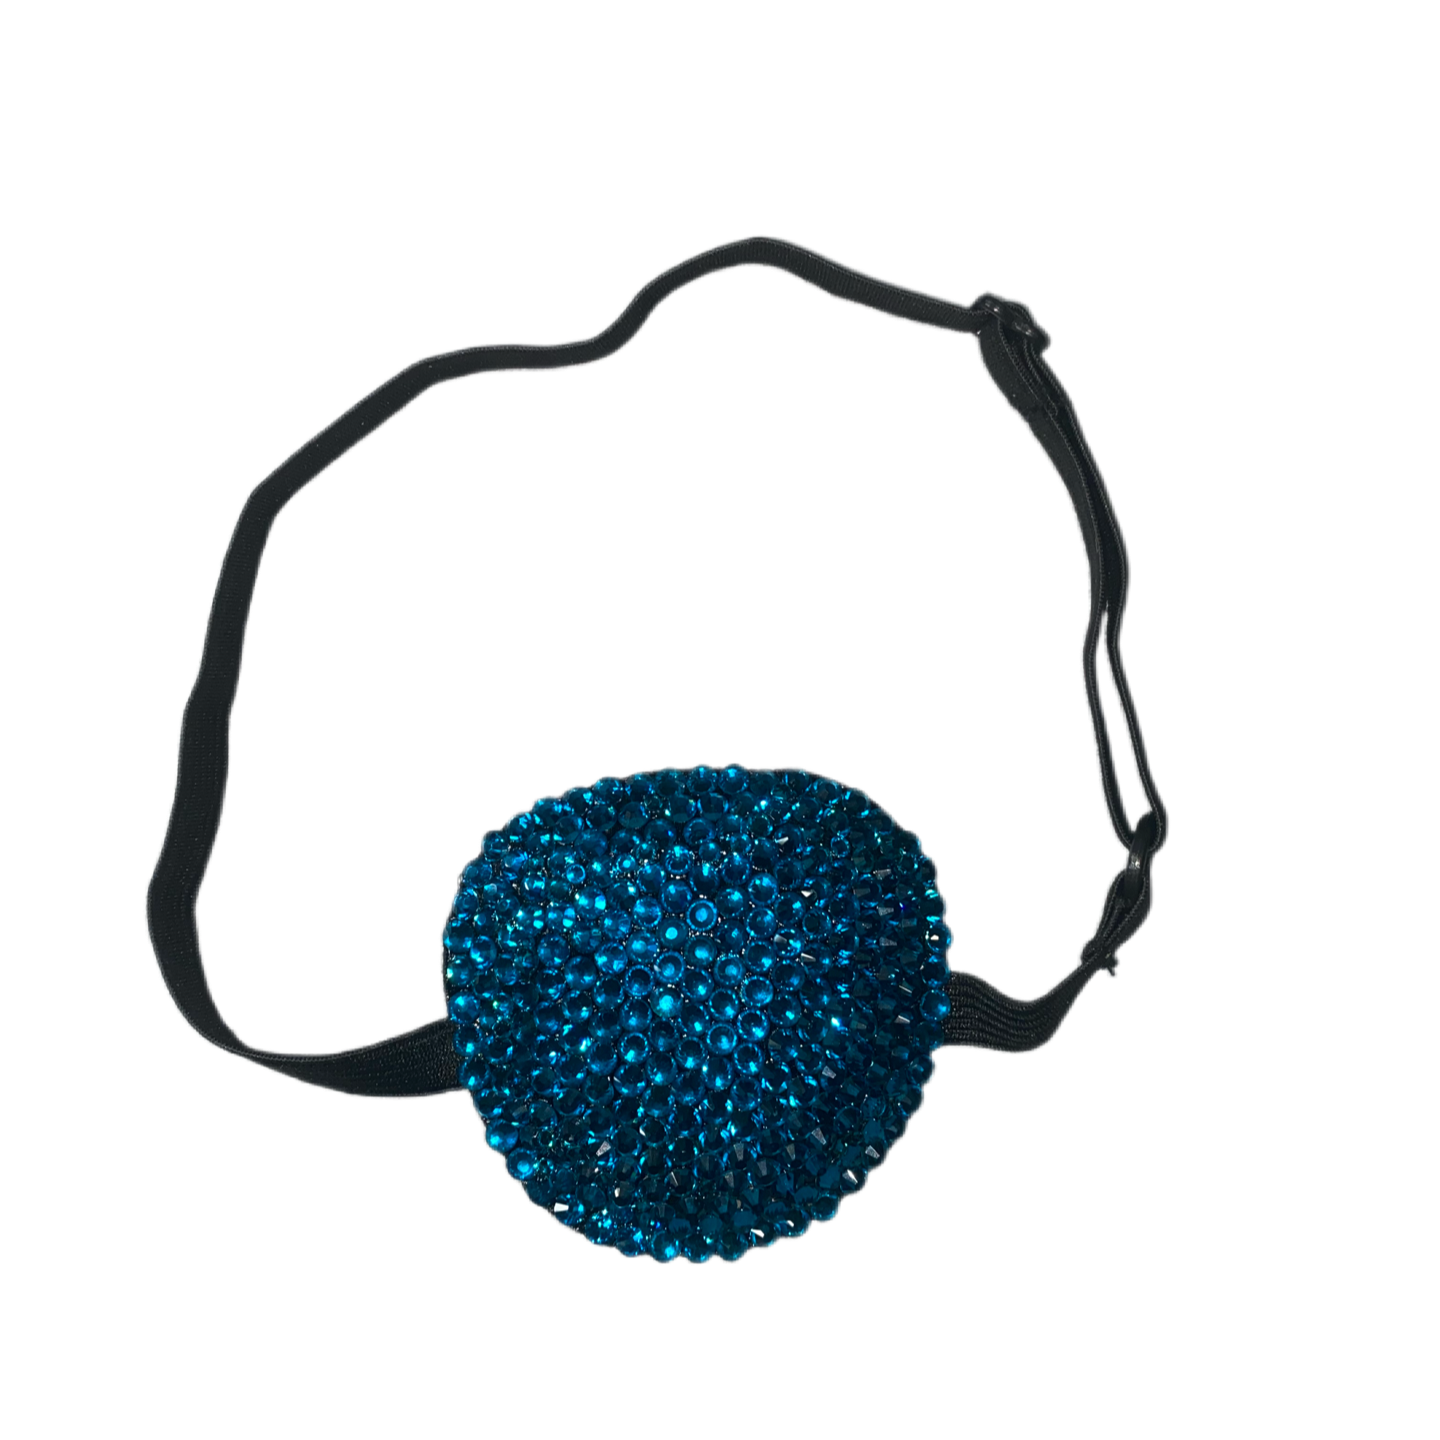 Black Padded Medical Patch In Teal Blue Zircon Luxe Crystal Eye Patch